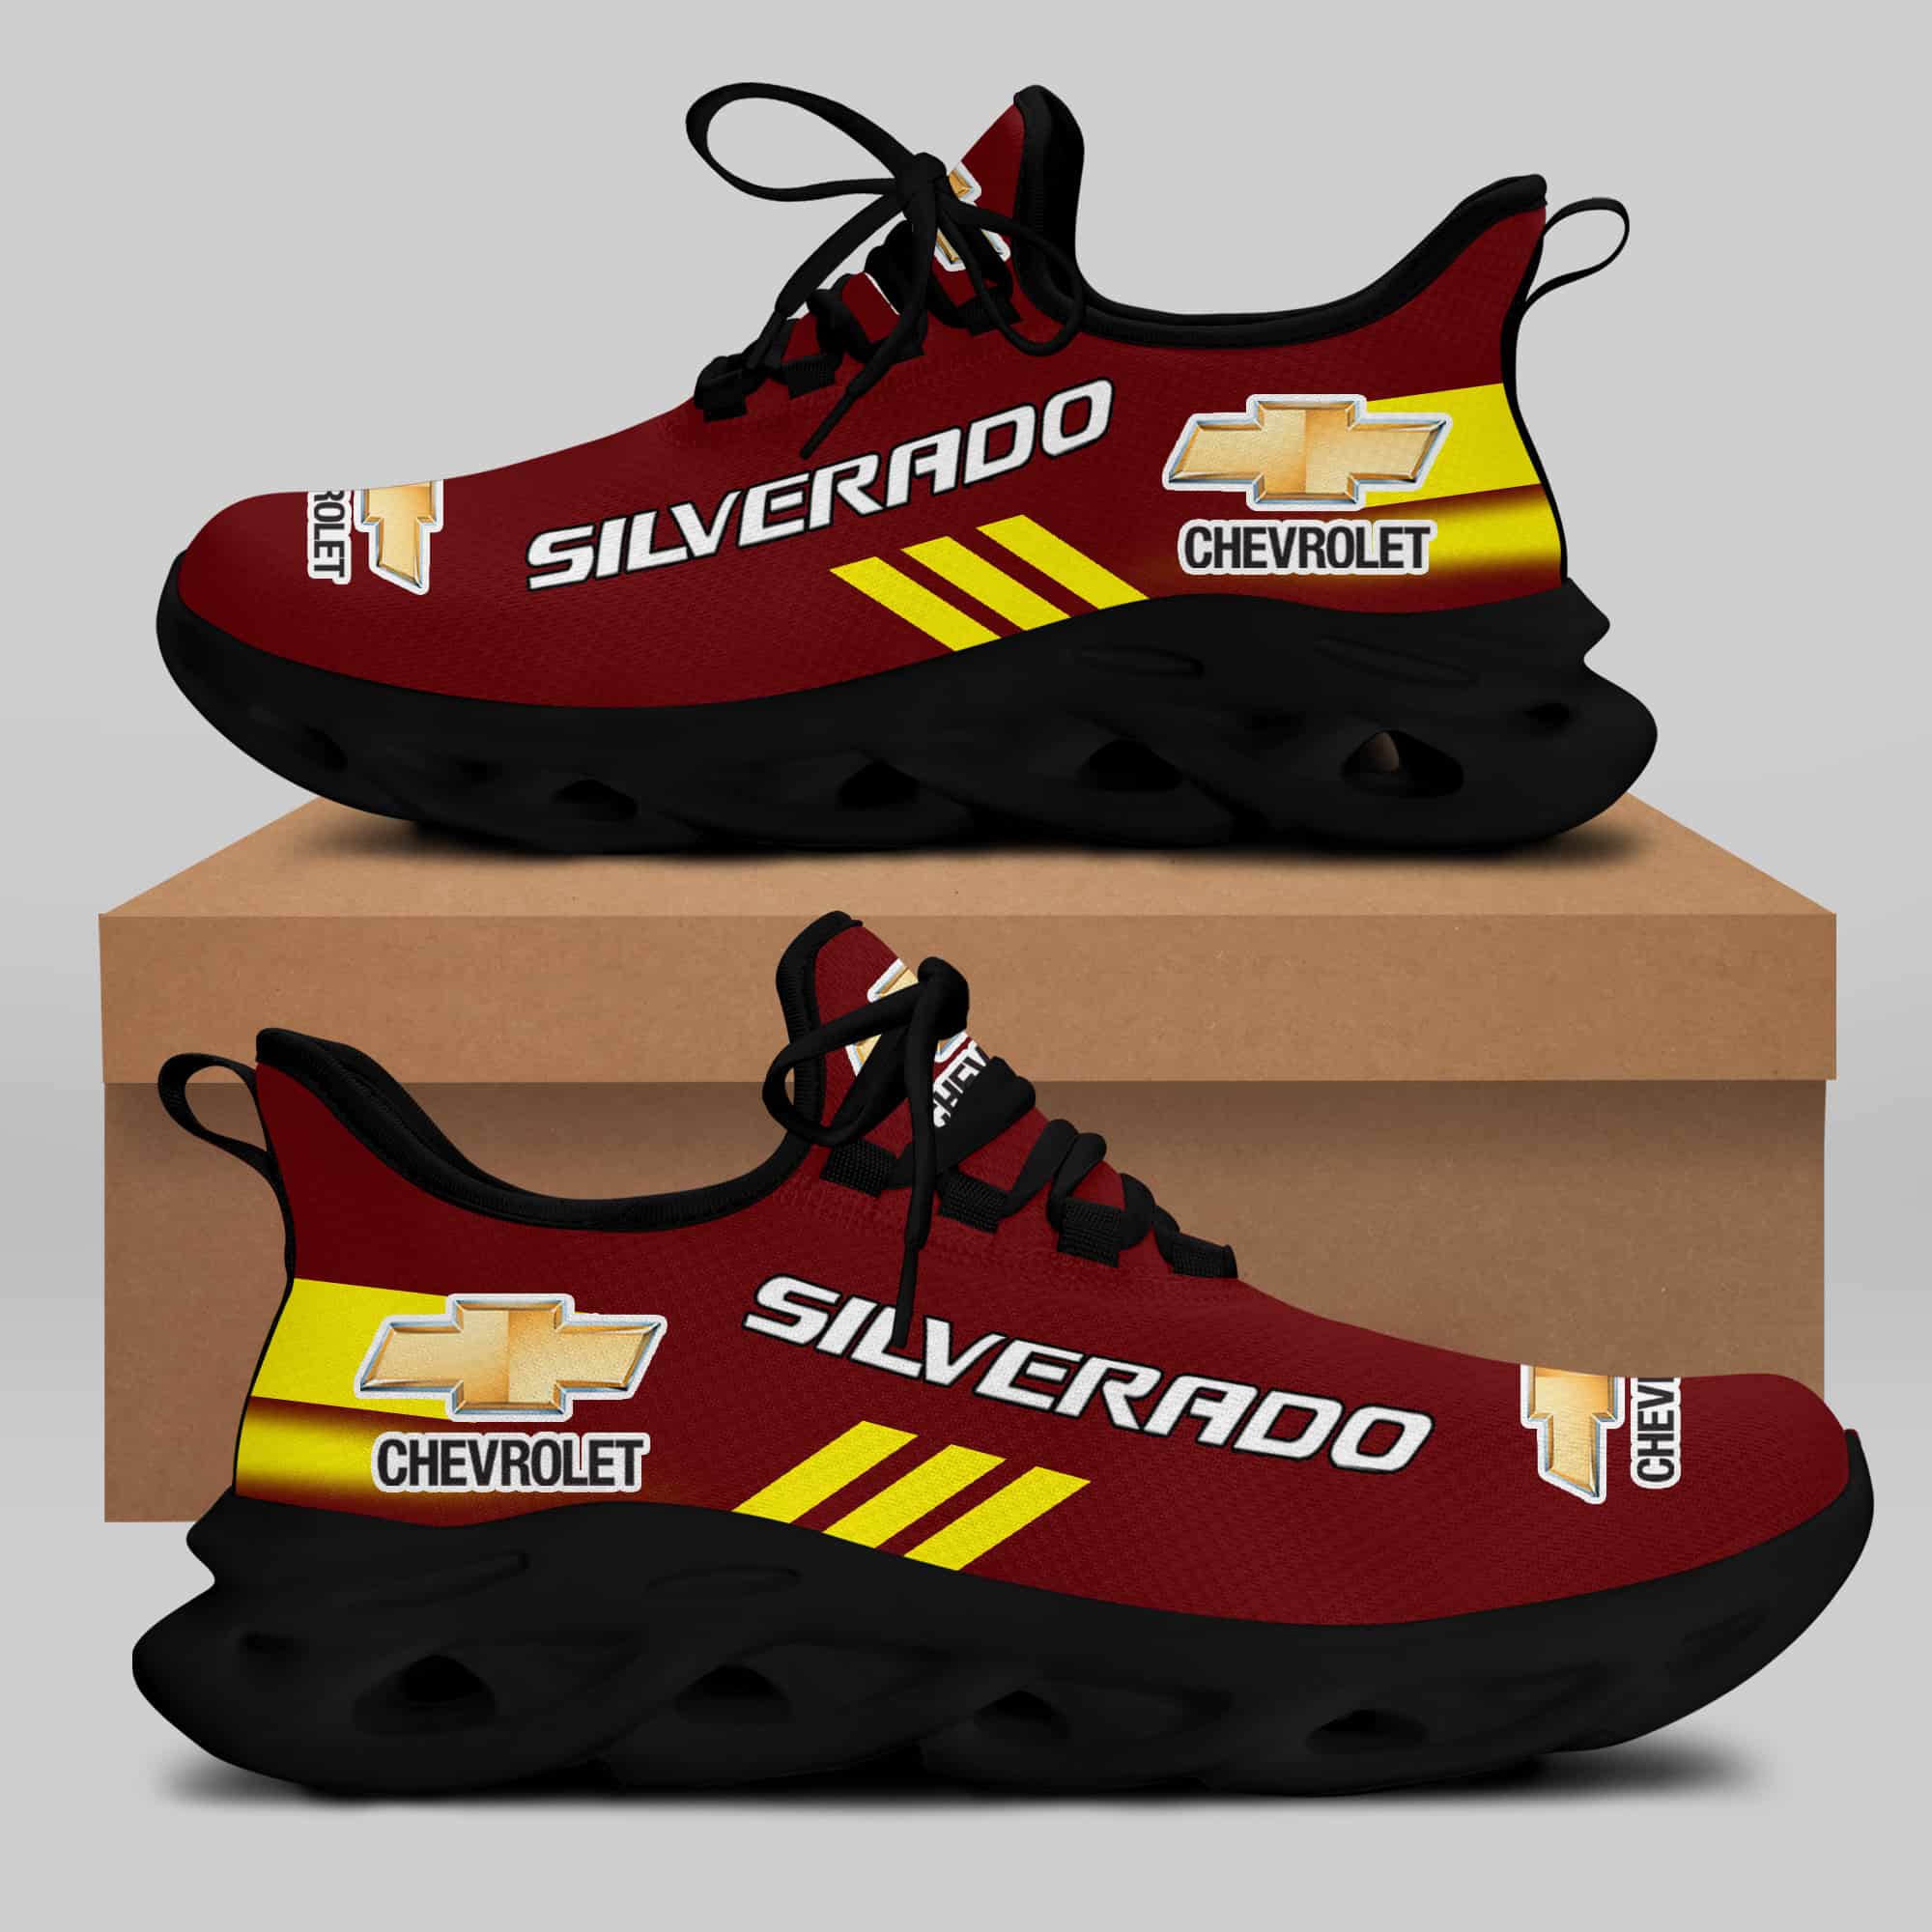 Chevrolet Silverado - Running Shoes Max Soul Shoes Sneakers Ver 8 1